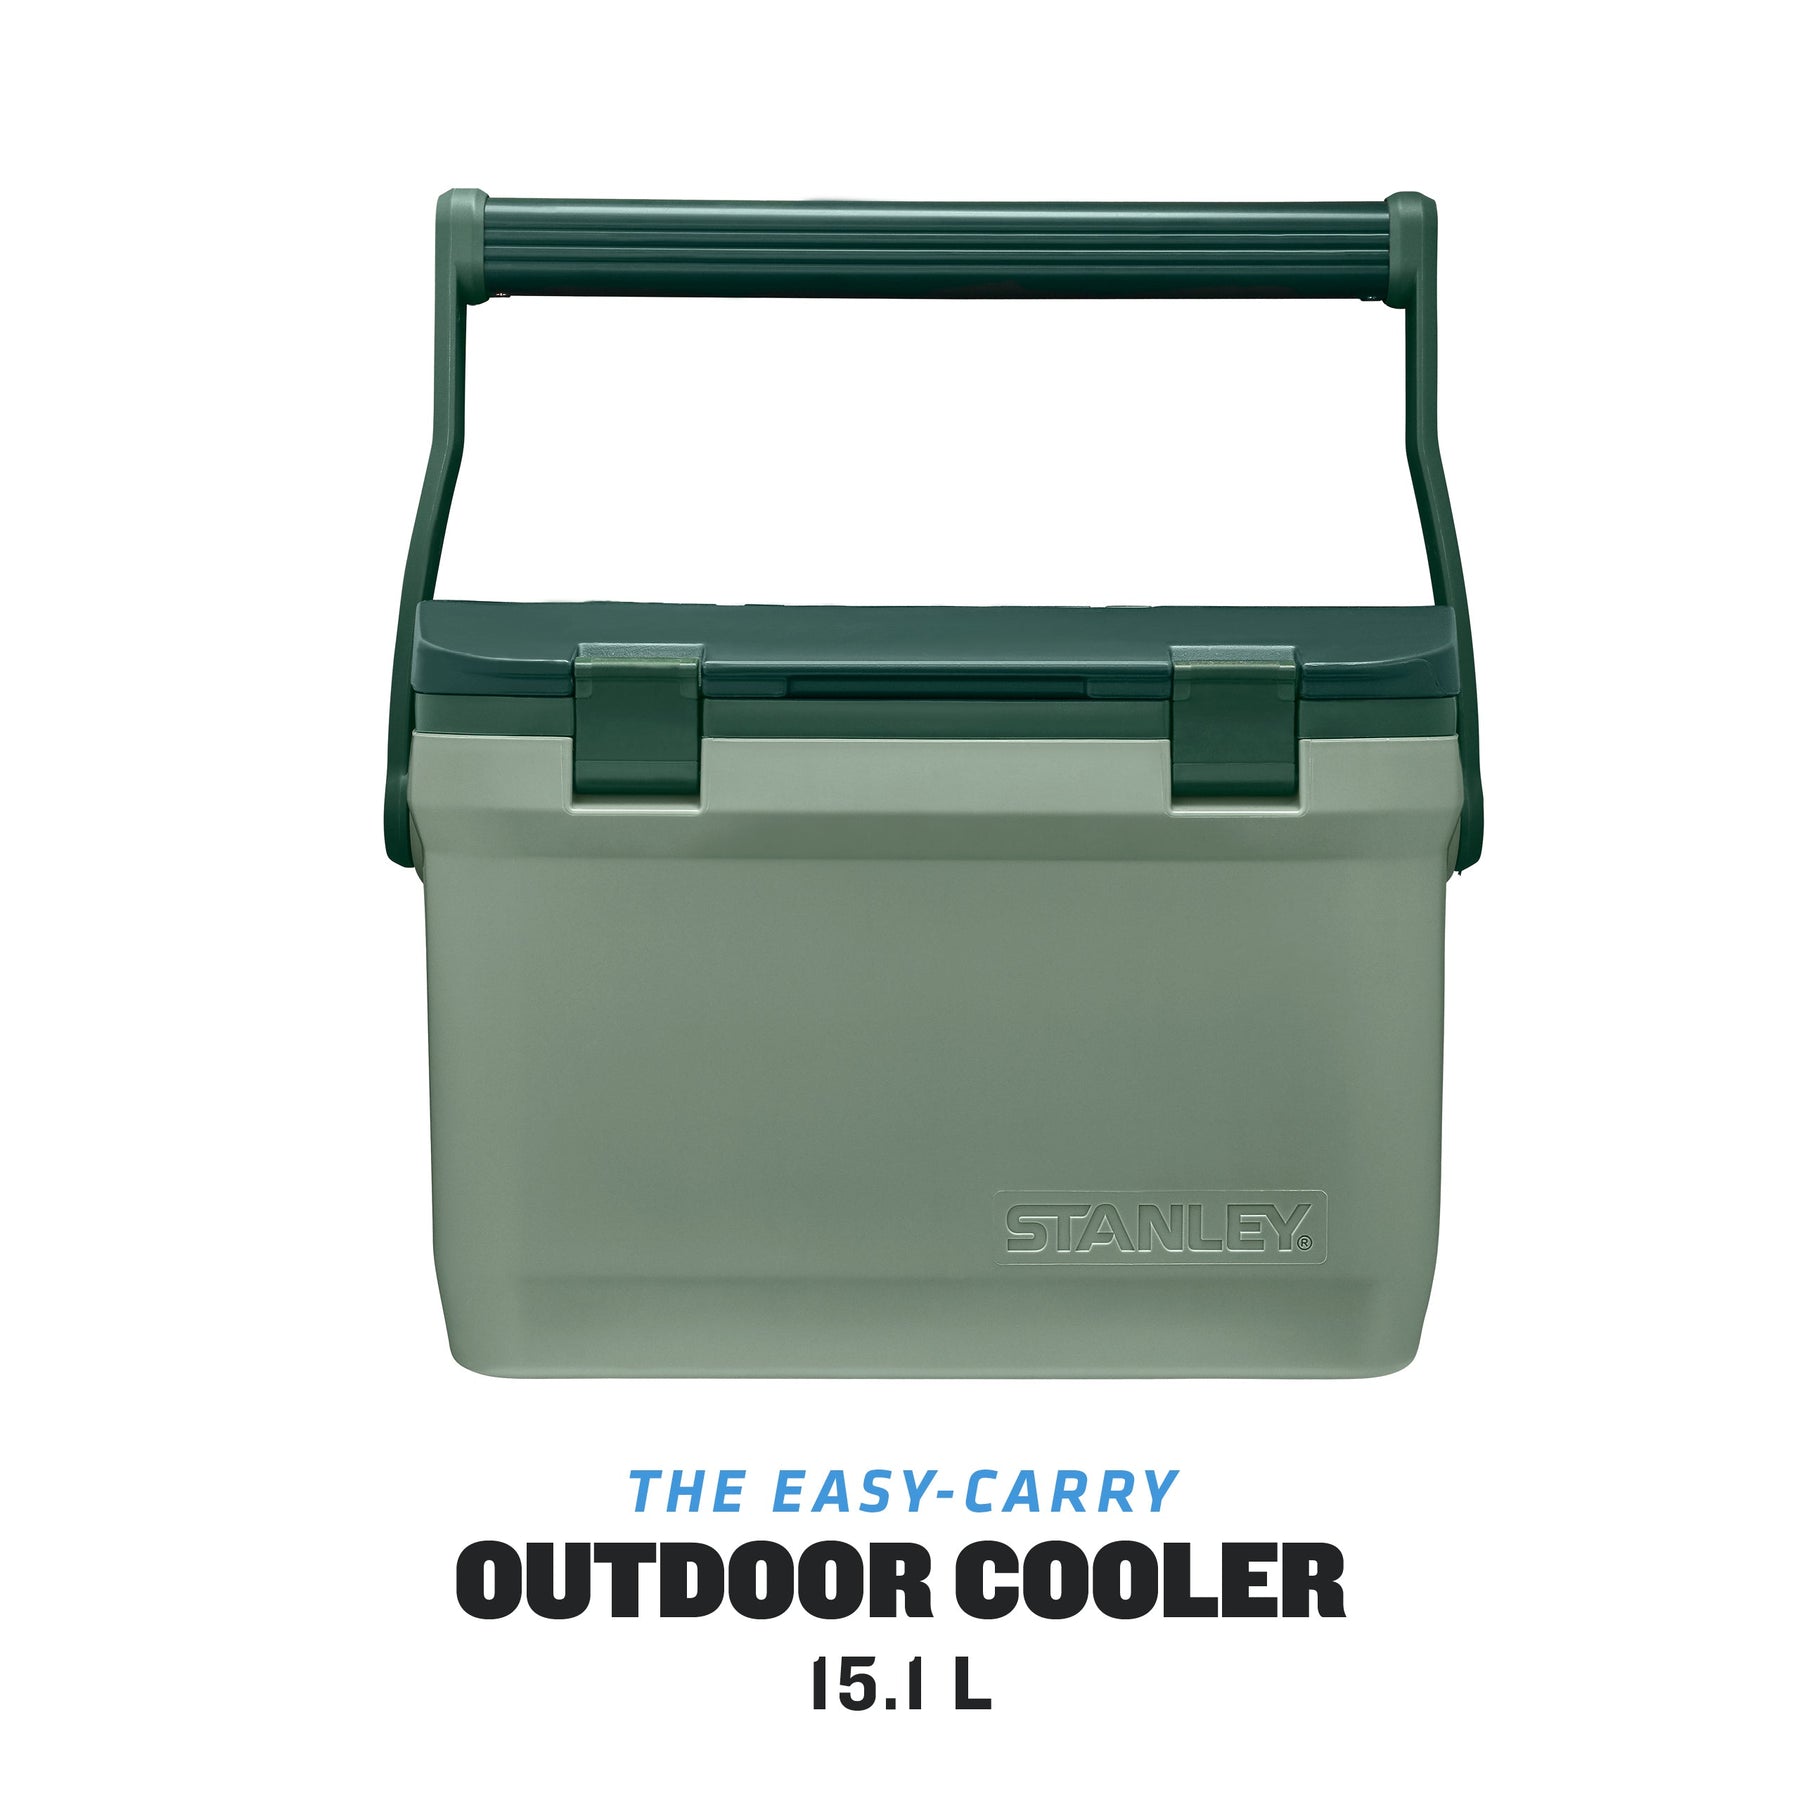 Stanley Adventure Outdoor Cooler 15.1L Green - Double Wall Foam Insulated  Cool Box - BPA-Free - Chest Cooler - Heavy Duty Camping Cooler Box Doubles